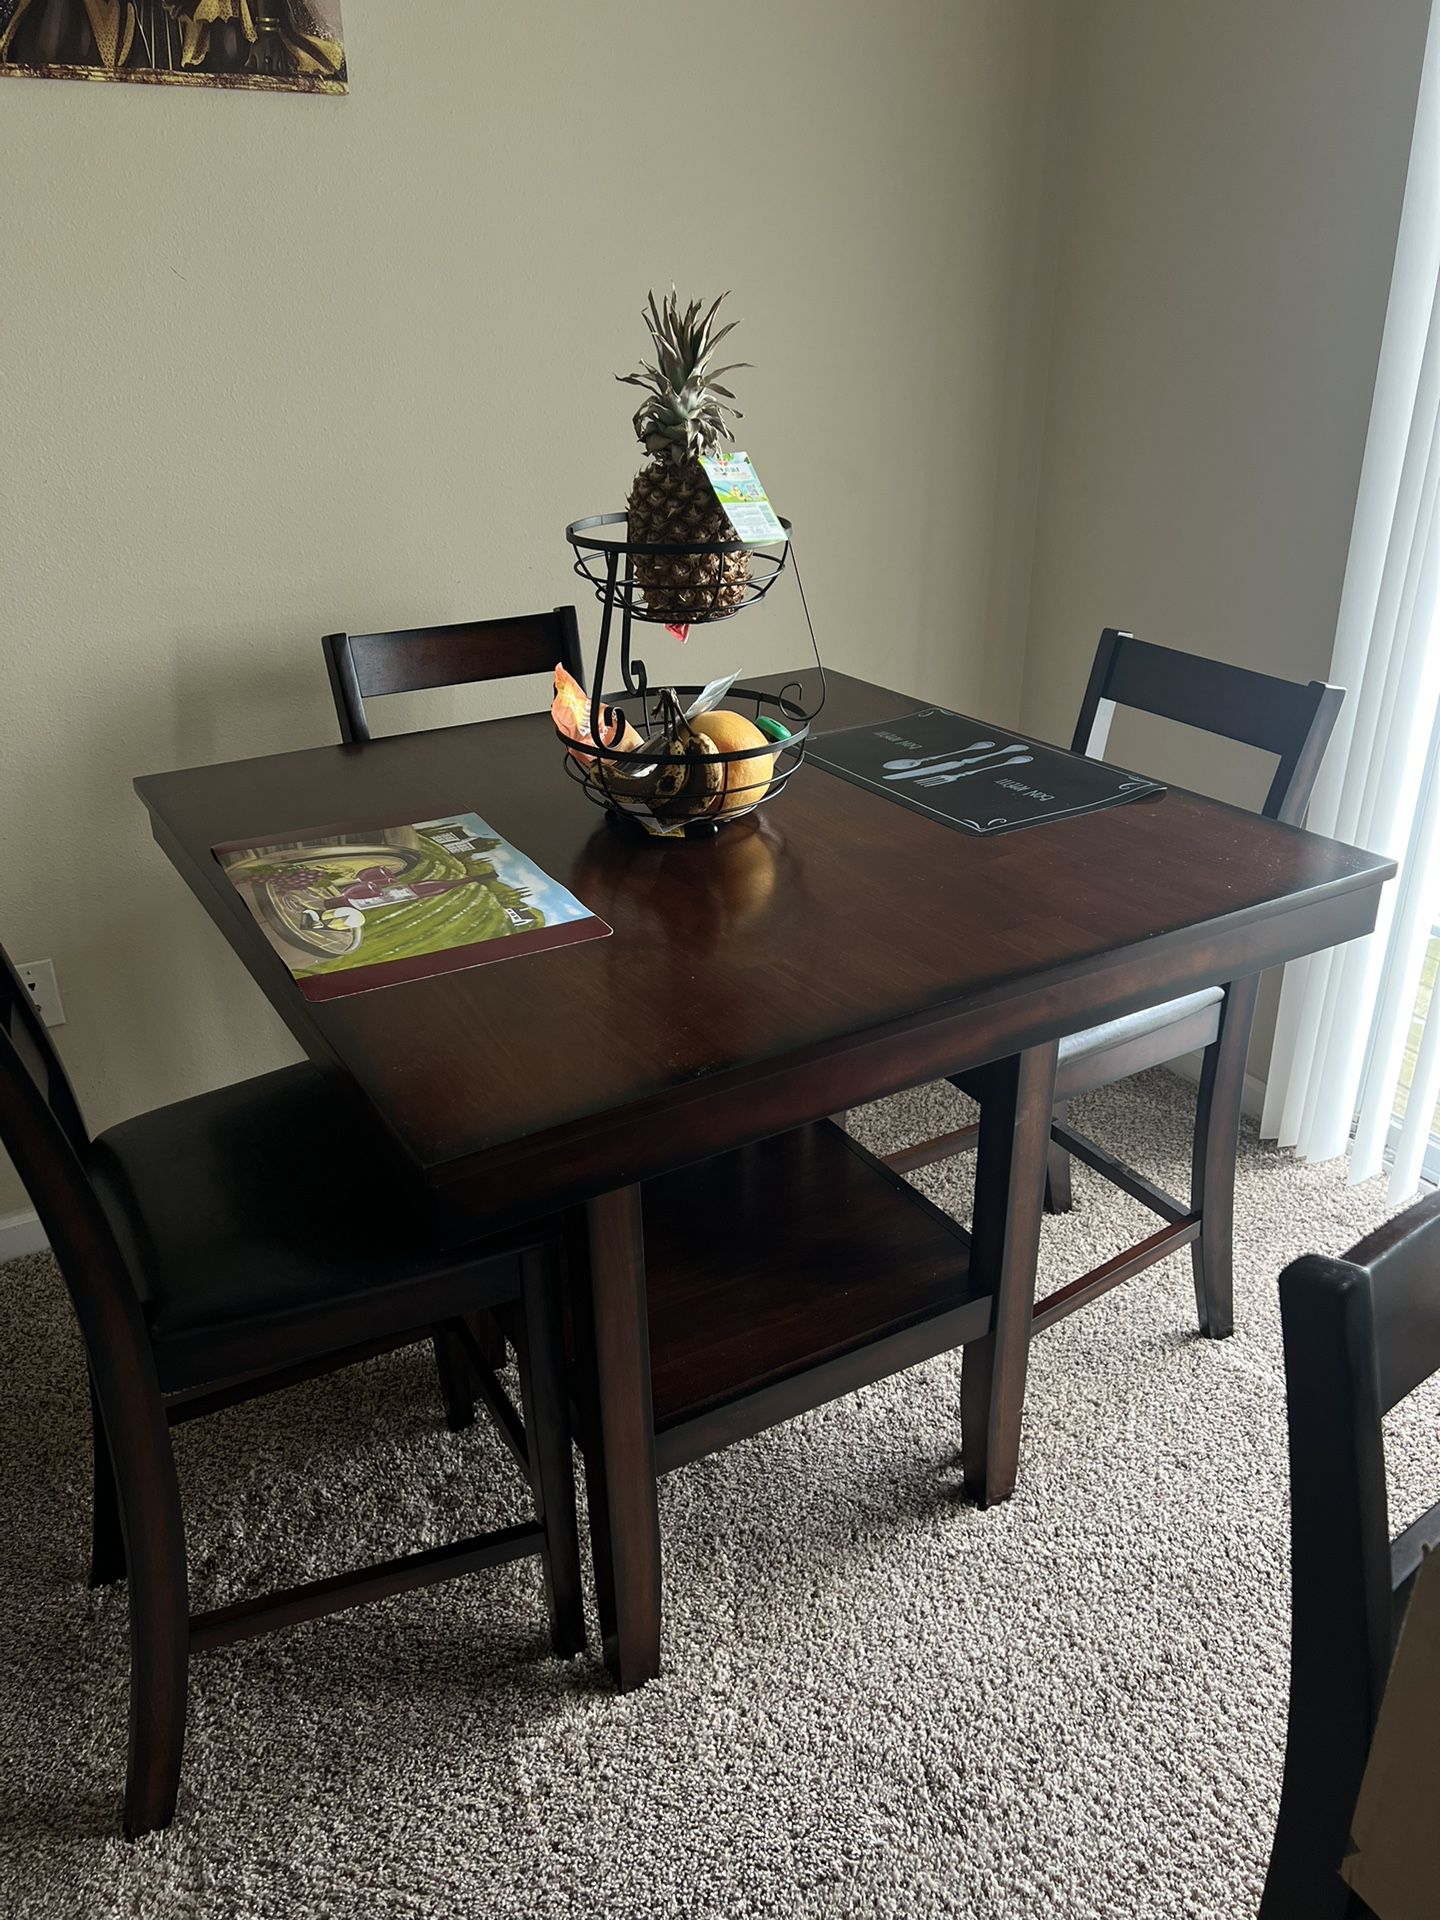 (Real Rosewood) Wooden Dining Table W/ 4 Chairs 